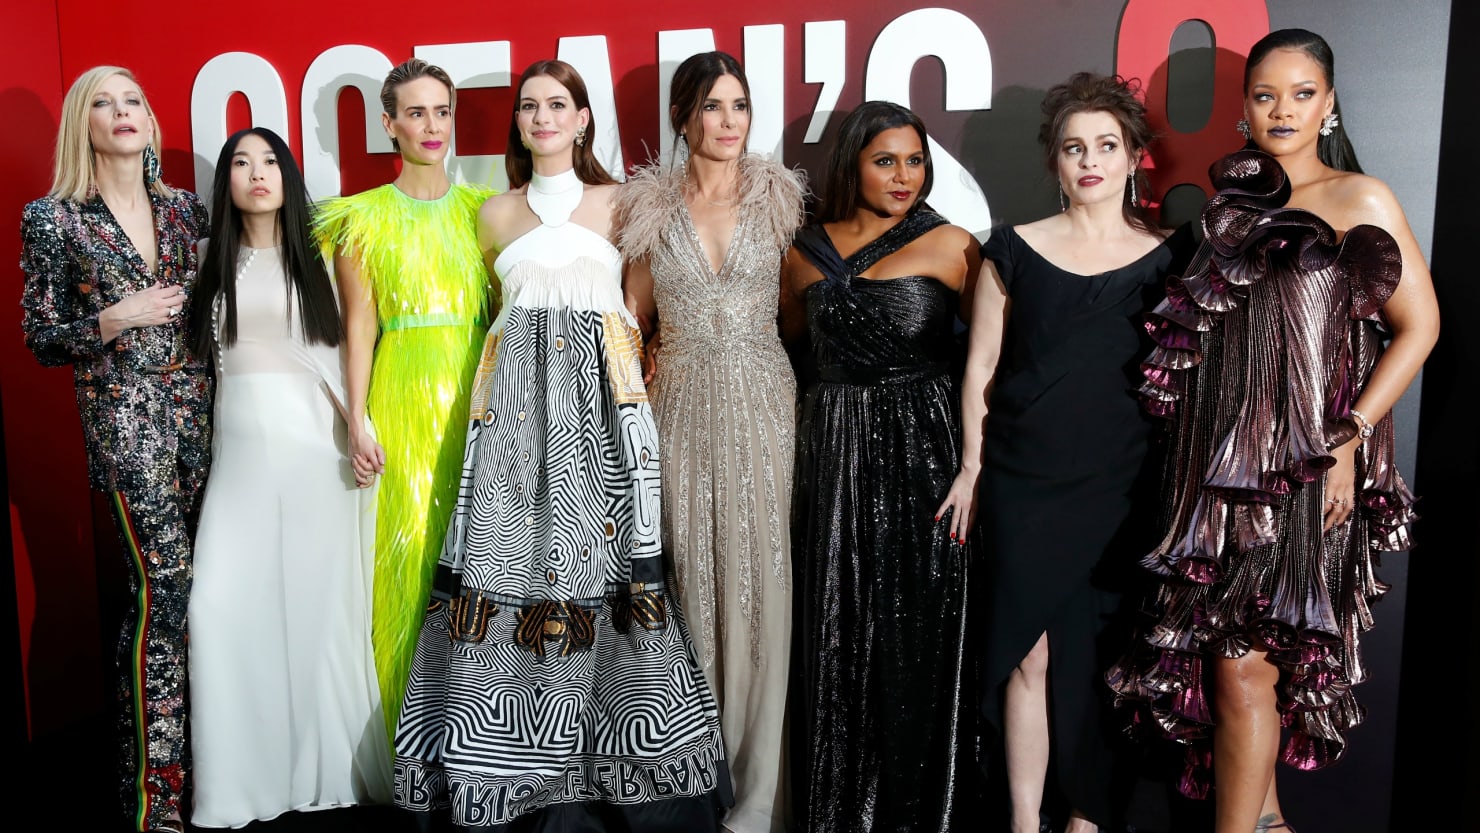 All-Female ‘Ocean’s 8’ Debuts at $41.5 Million, a Franchise Best